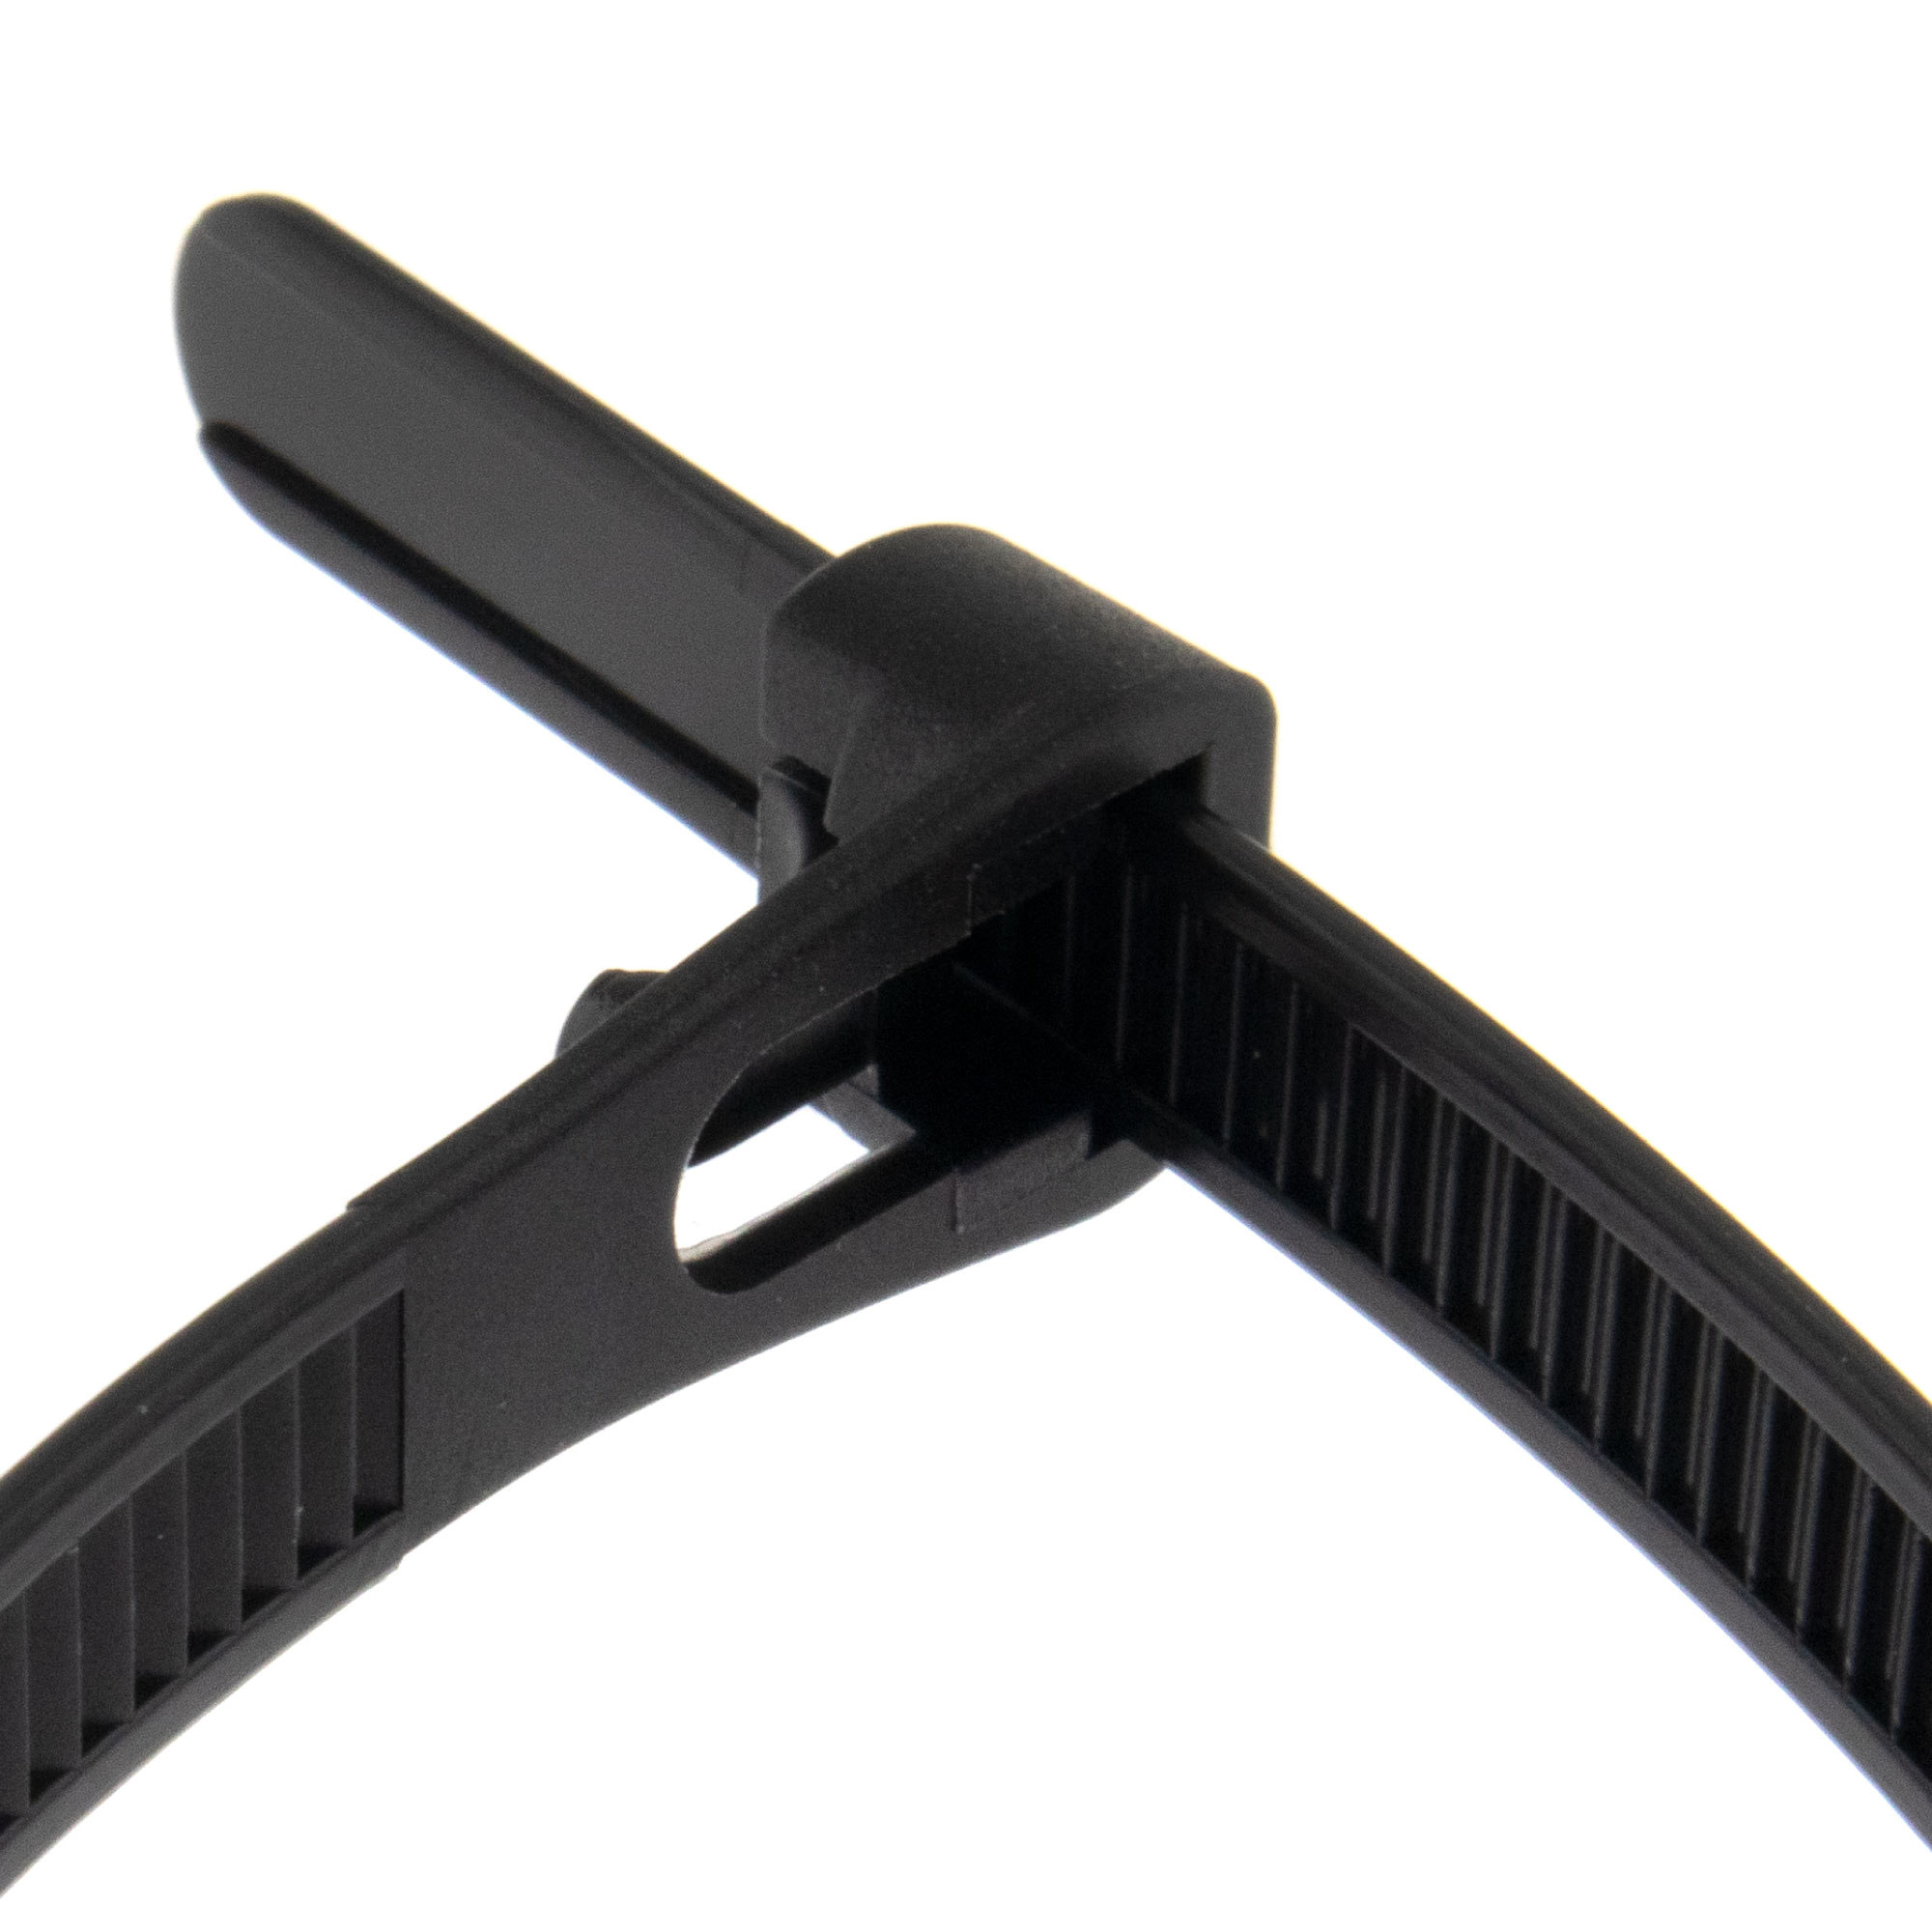 Cable tie re-use-able 200 x 7,6mm, black, 100PCS